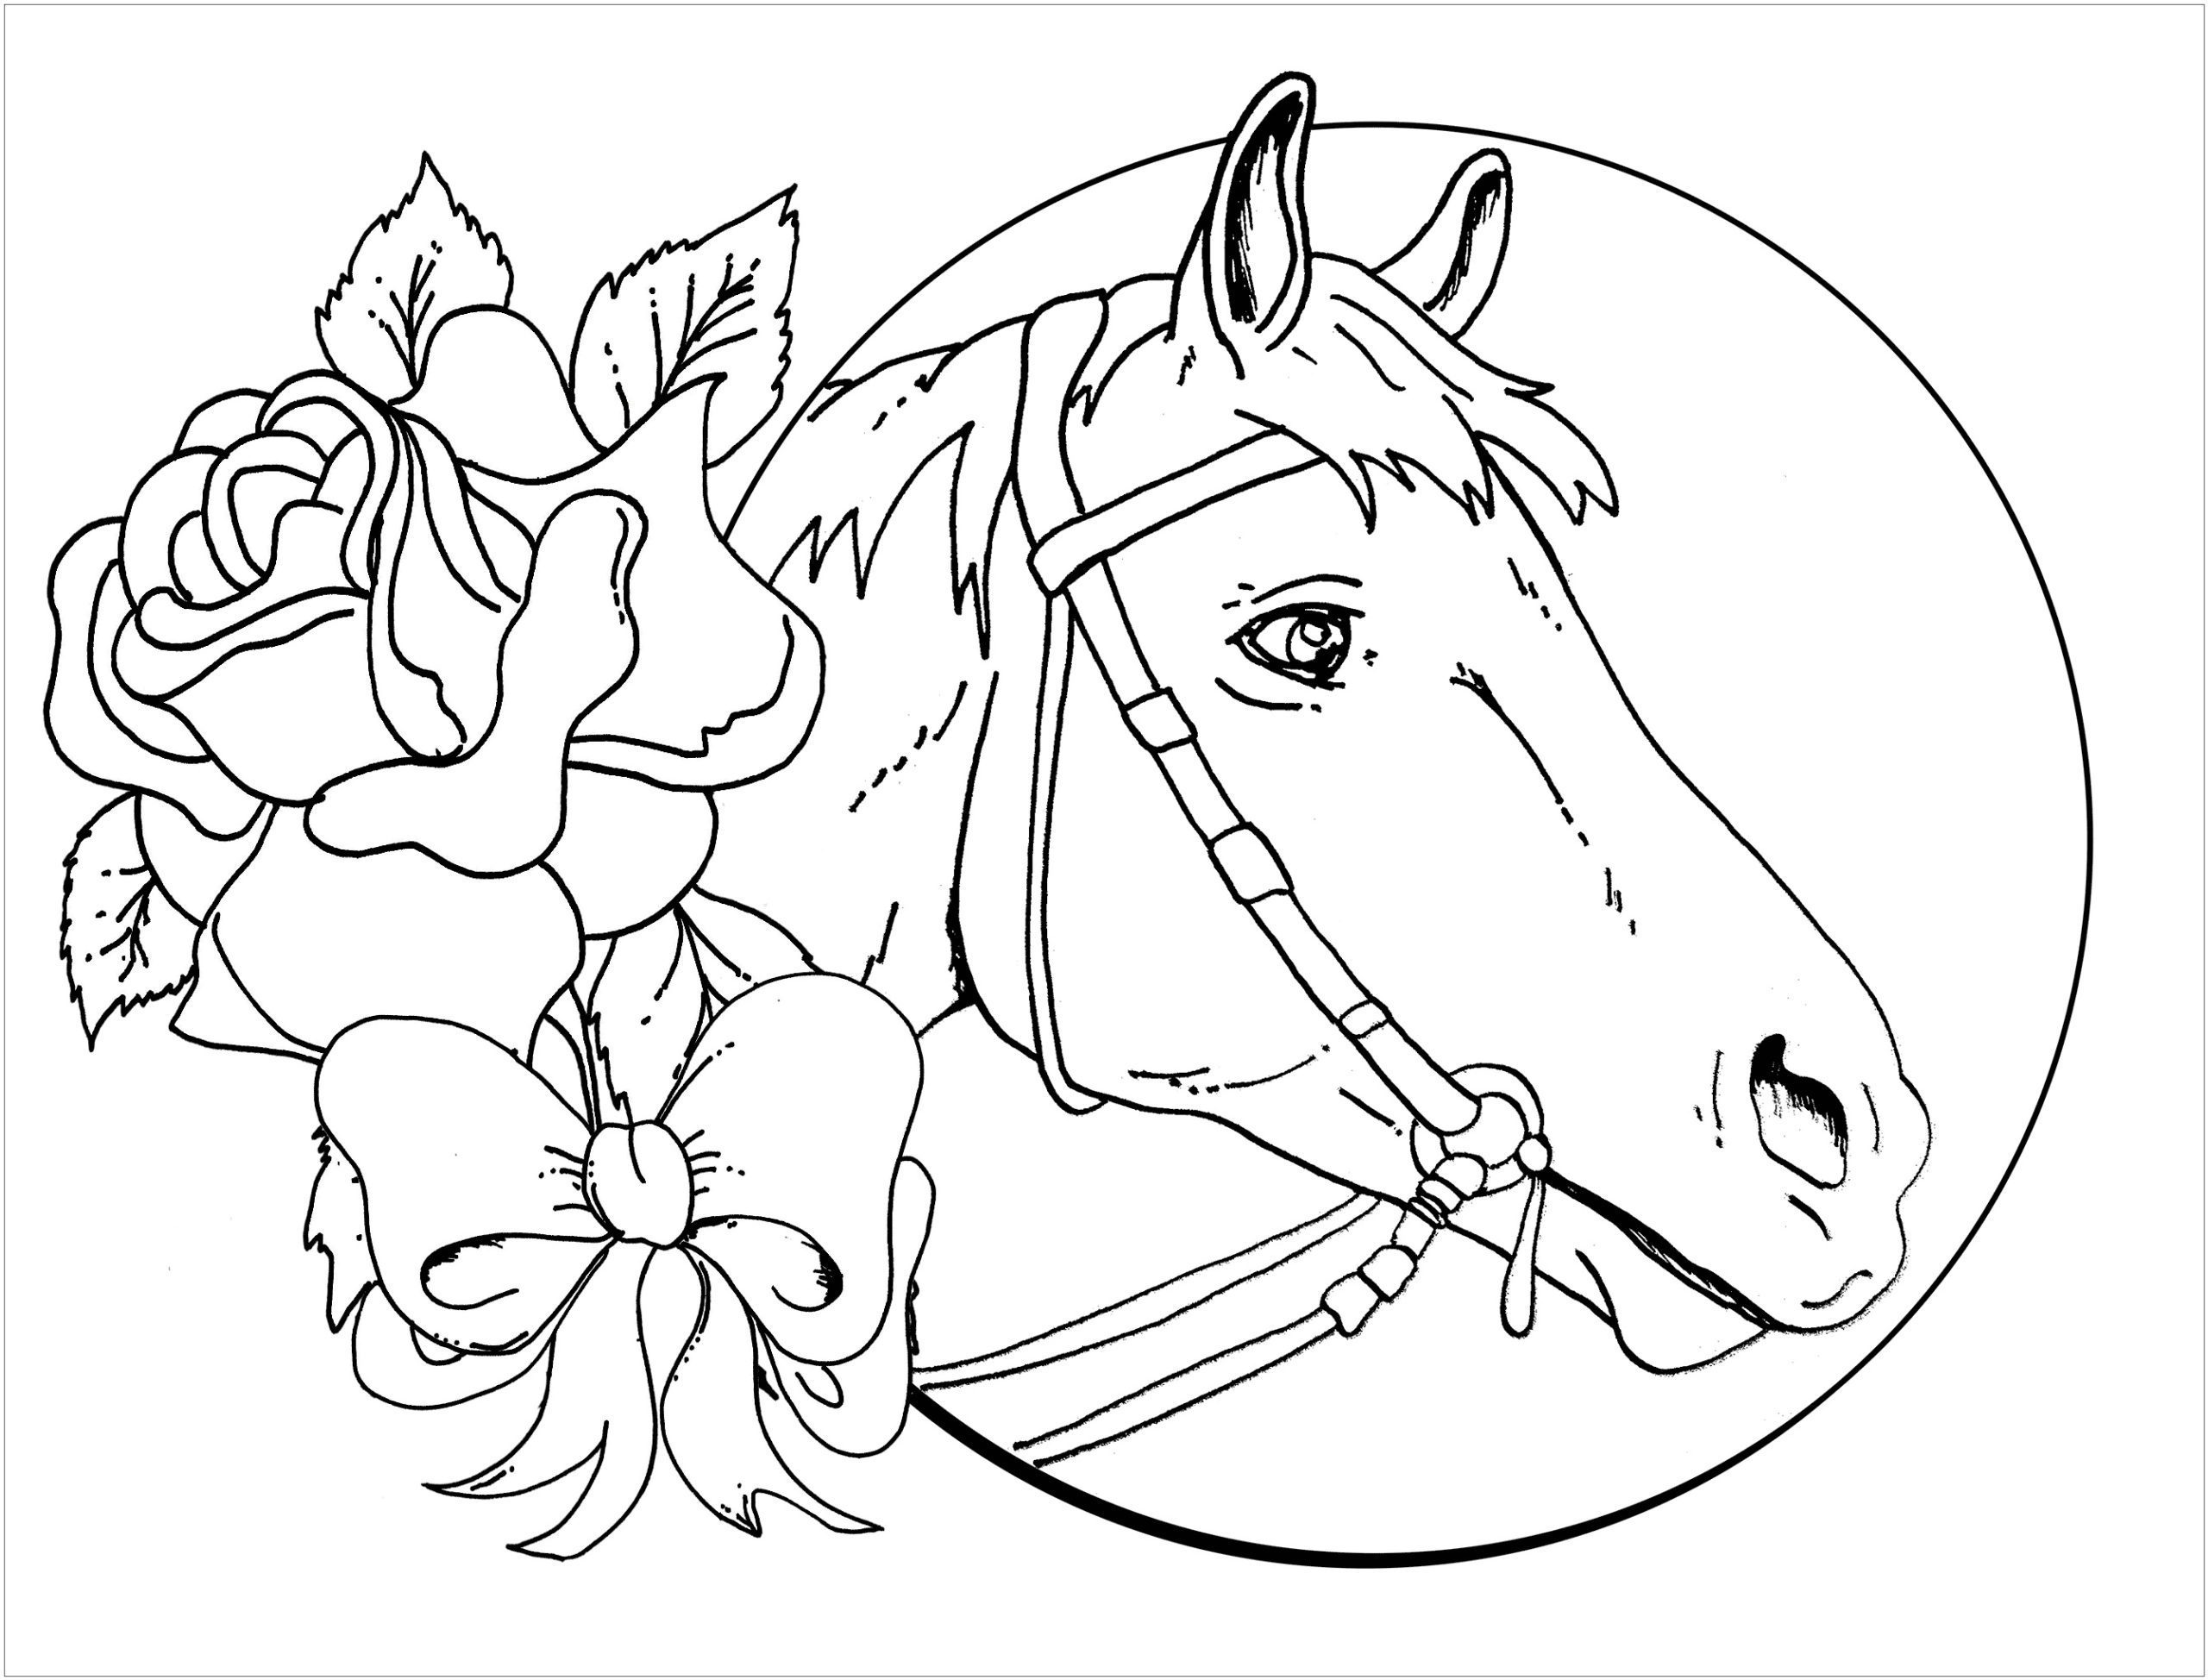 Horse Coloring Pages For Girls